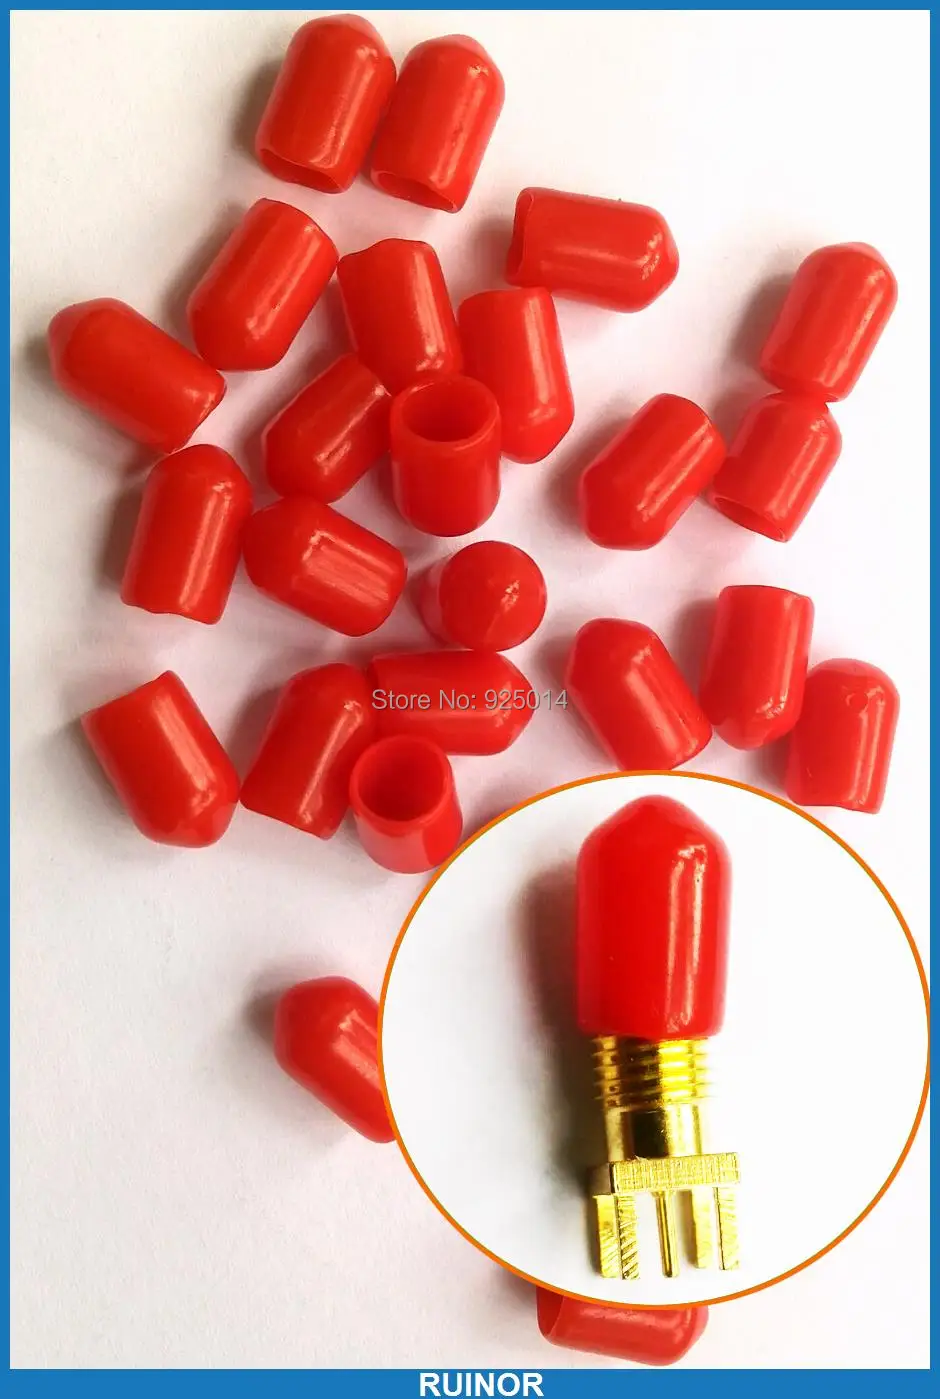 100PCS Diameter 6mm Plastic covers Dust cap Red for RF SMA female connector